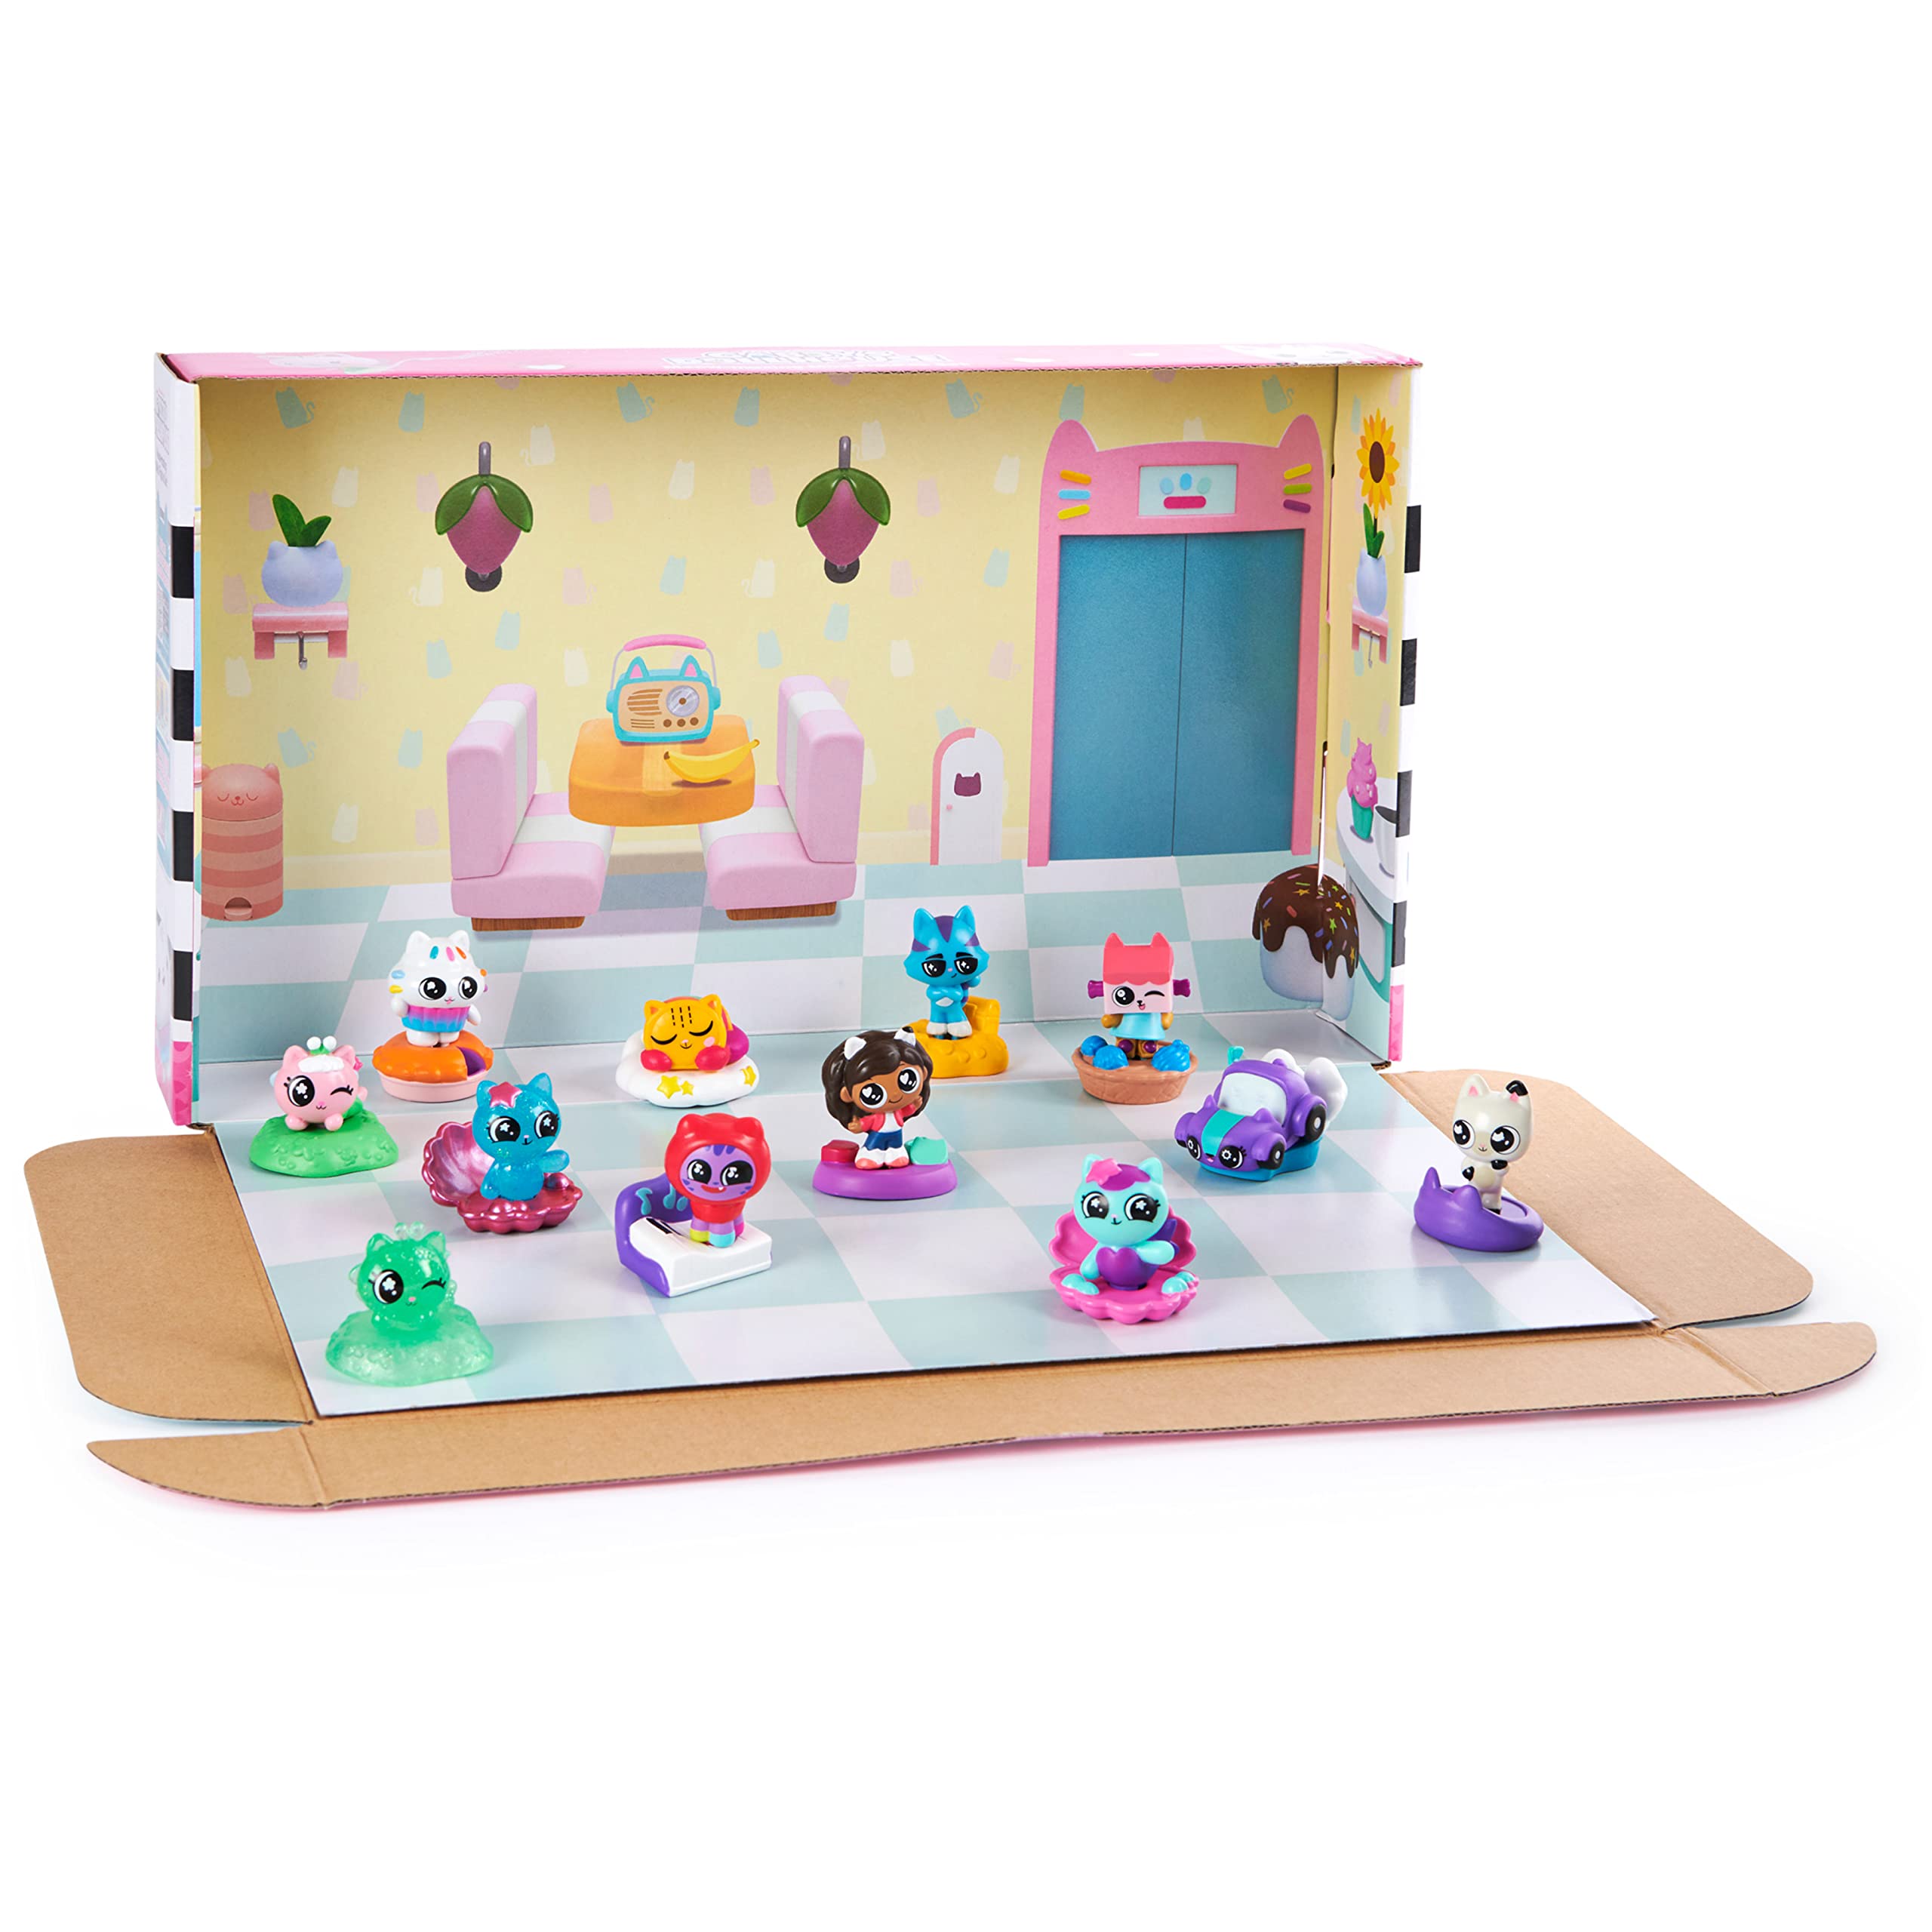 Gabby's Dollhouse, Meow-Mazing Mini Figures 12-Pack (Amazon Exclusive), Kids Toys for Ages 3 and up